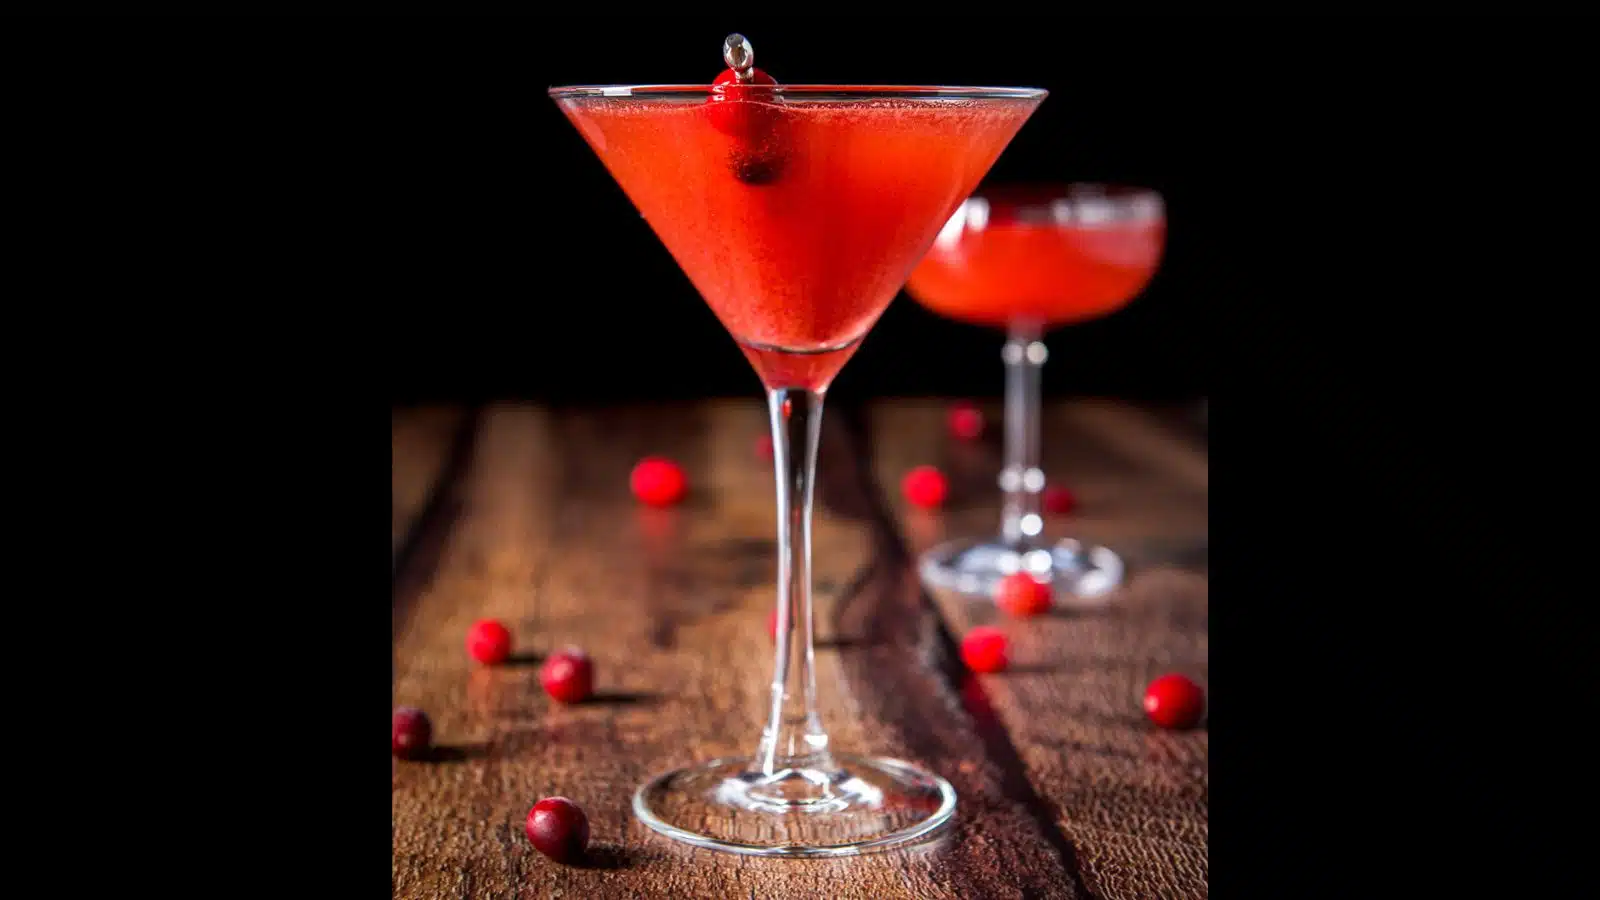 Two martini glasses filled with the cranberry martini with cranberries on a pick as garnish